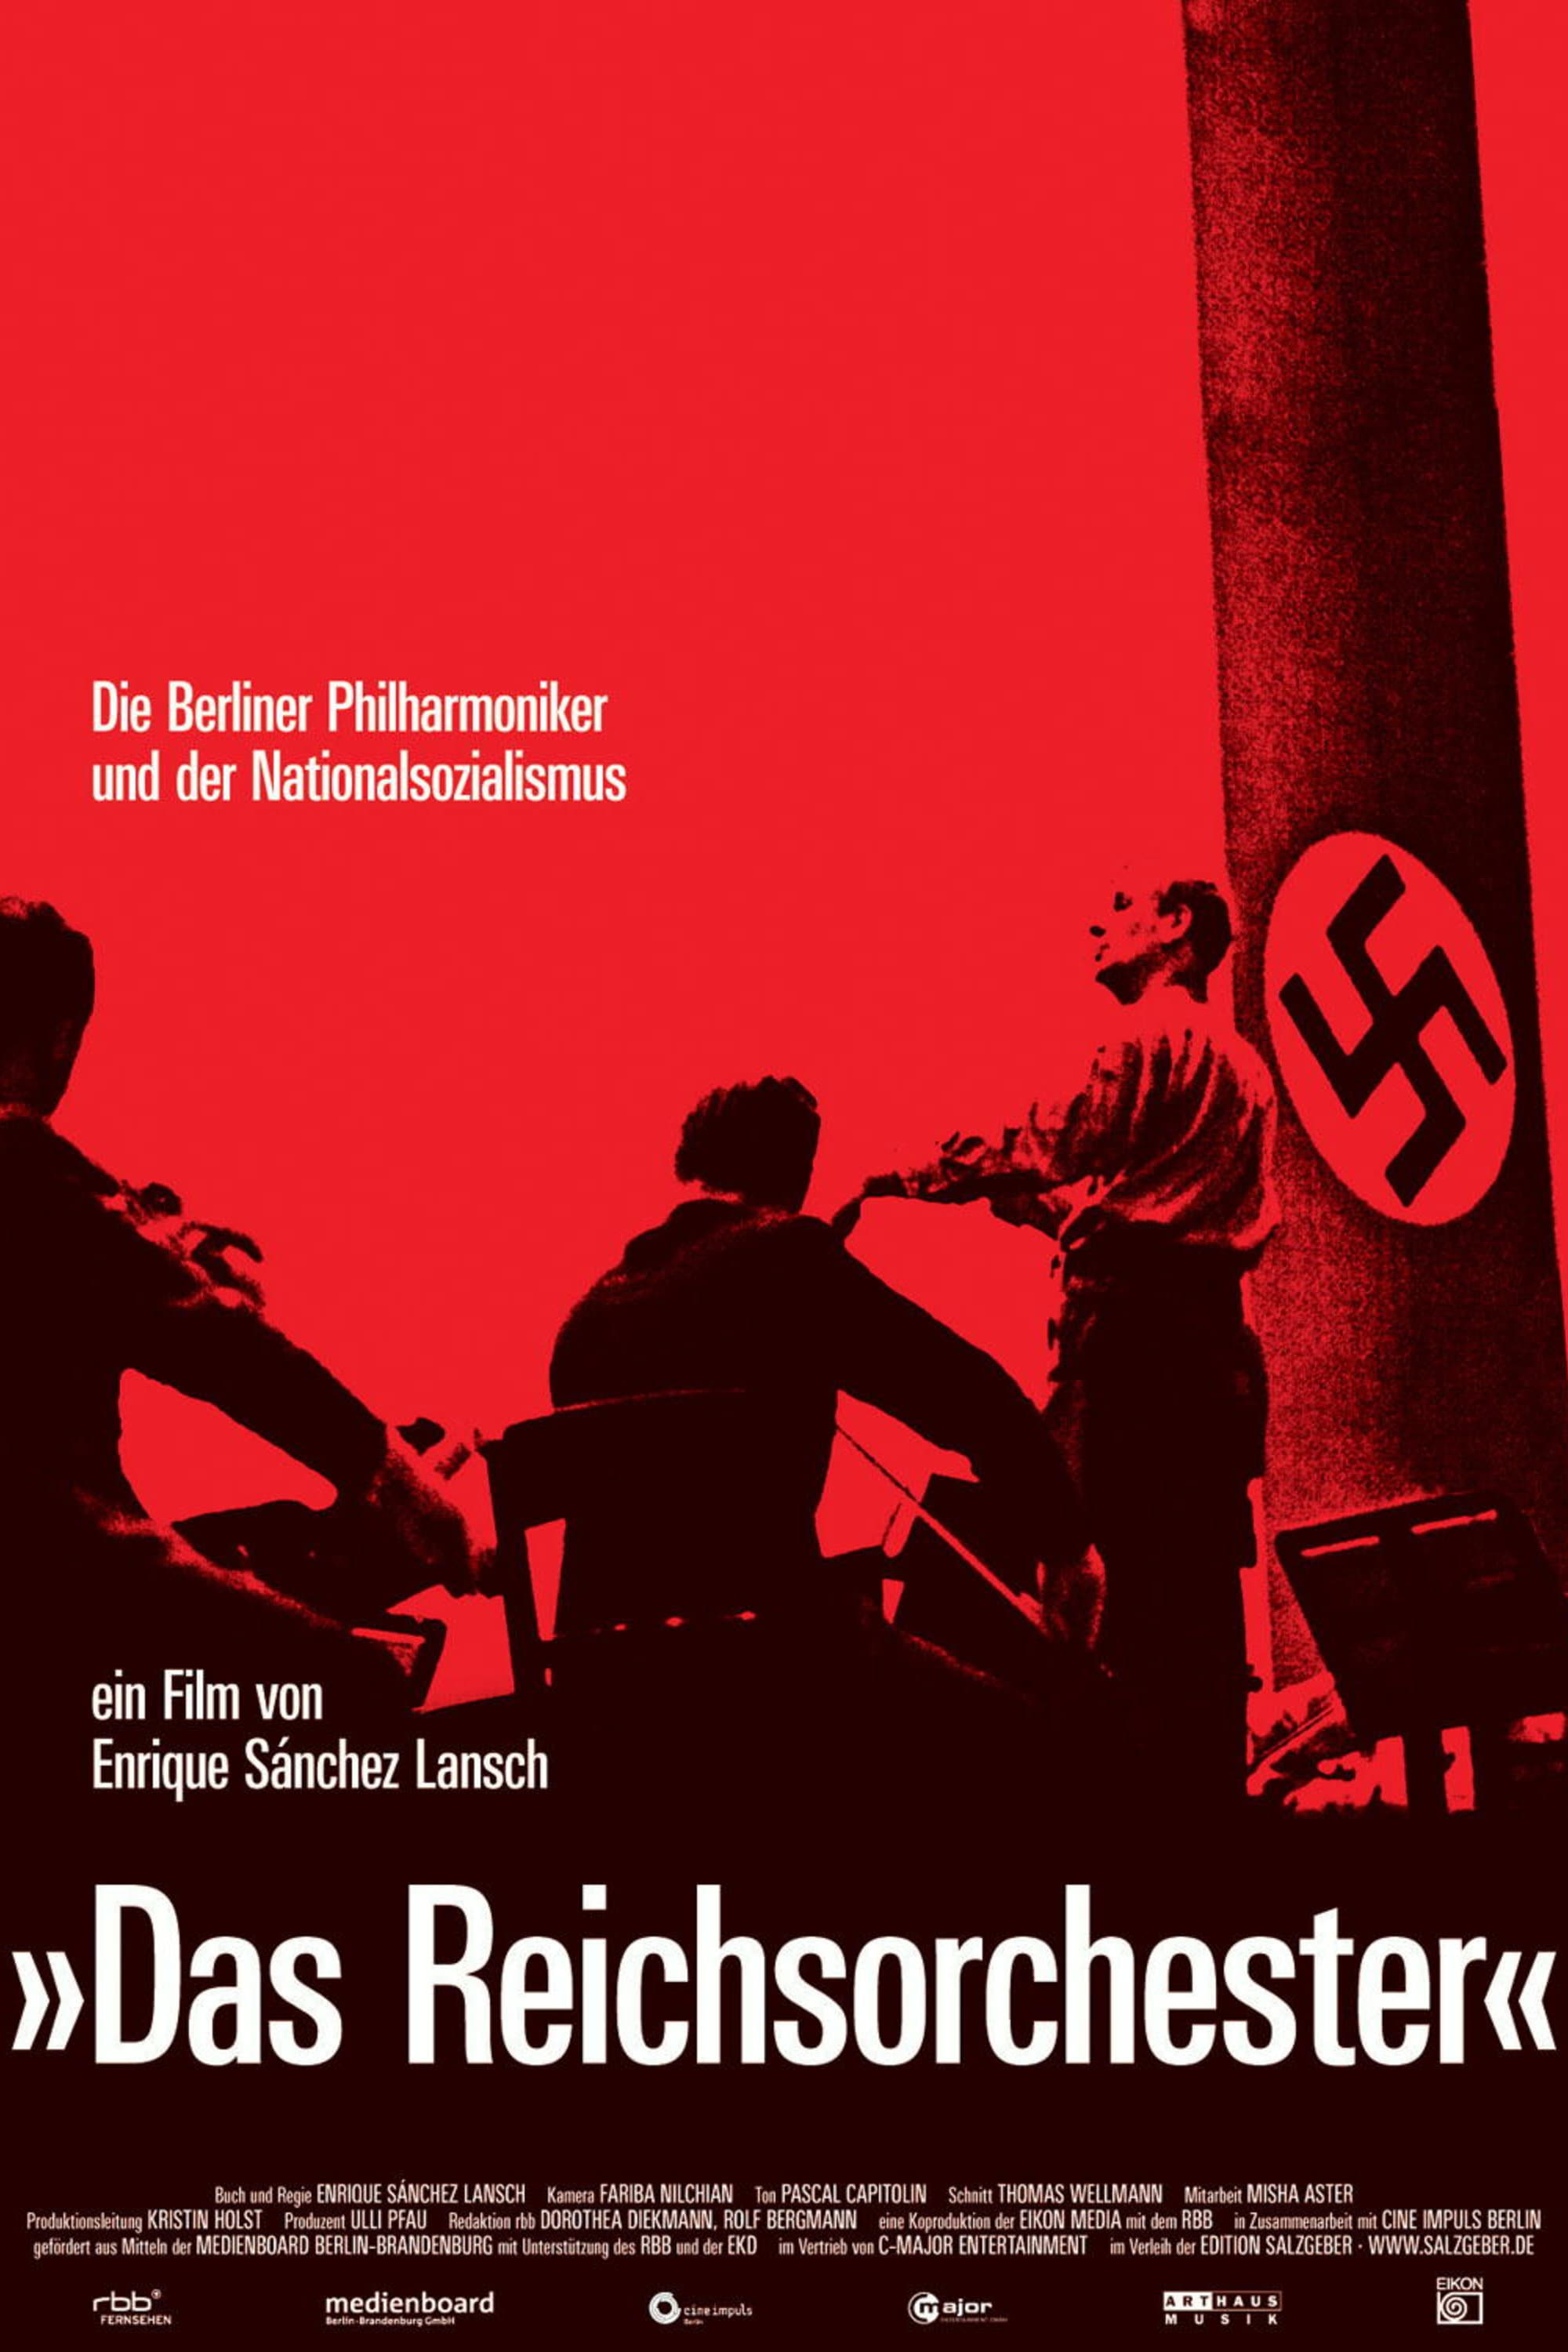 The Reich's Orchestra